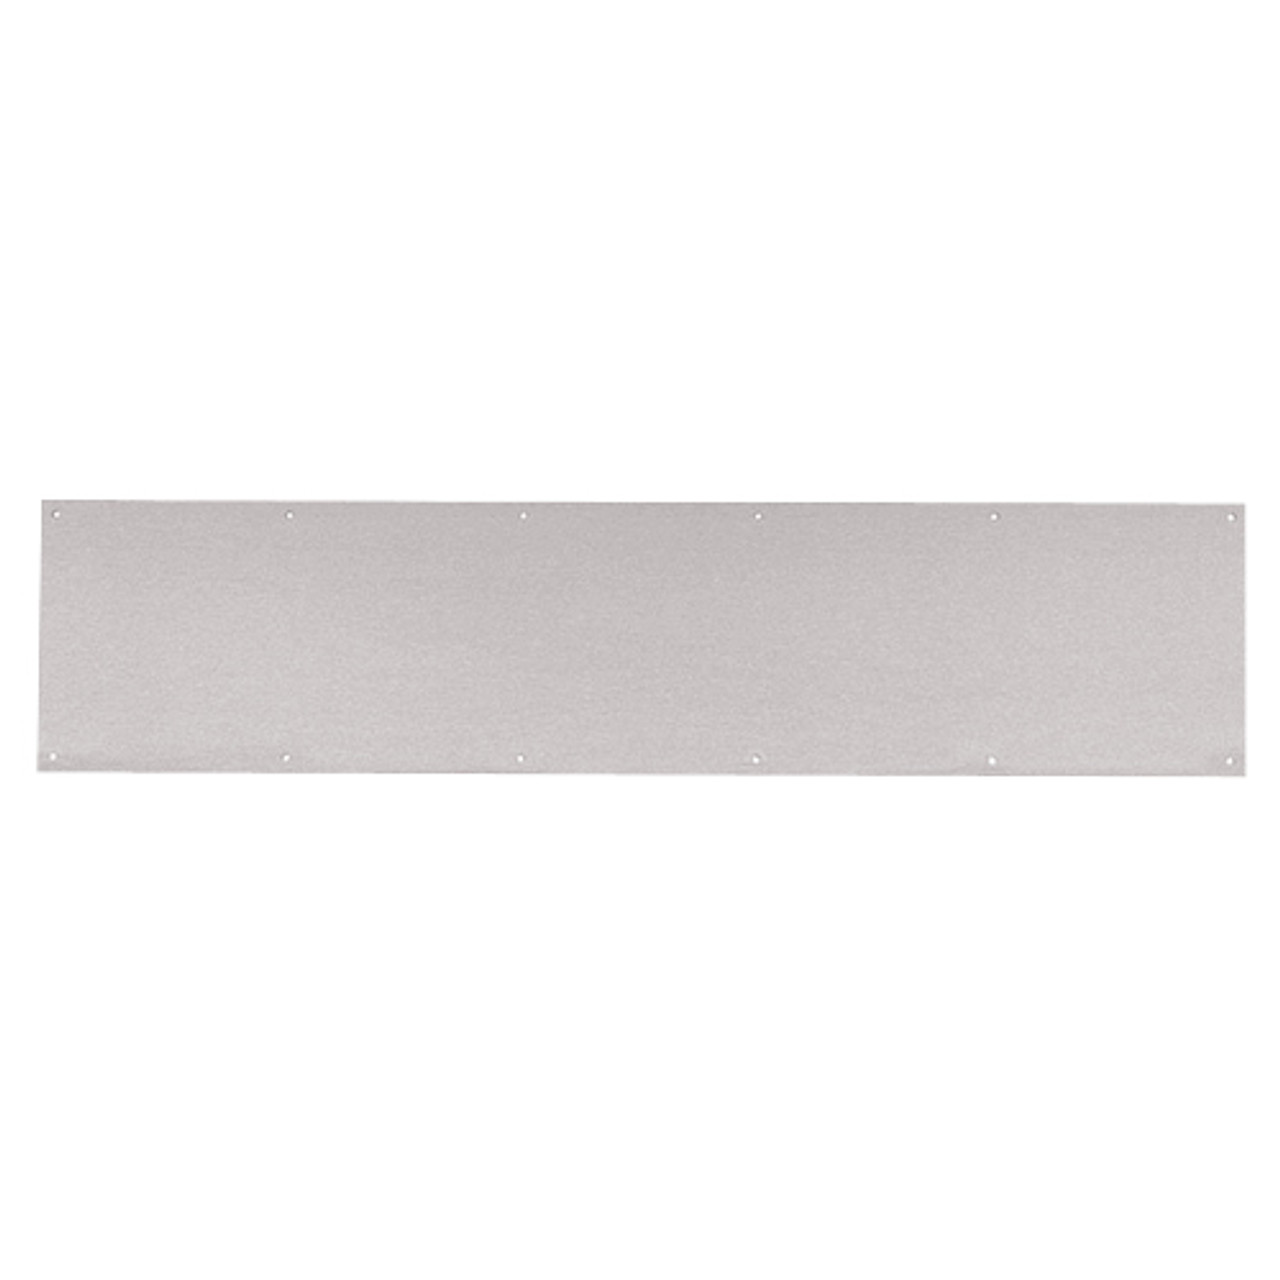 8400-US32D-9.5x46-B-CS Ives 8400 Series Protection Plate in Satin Stainless Steel